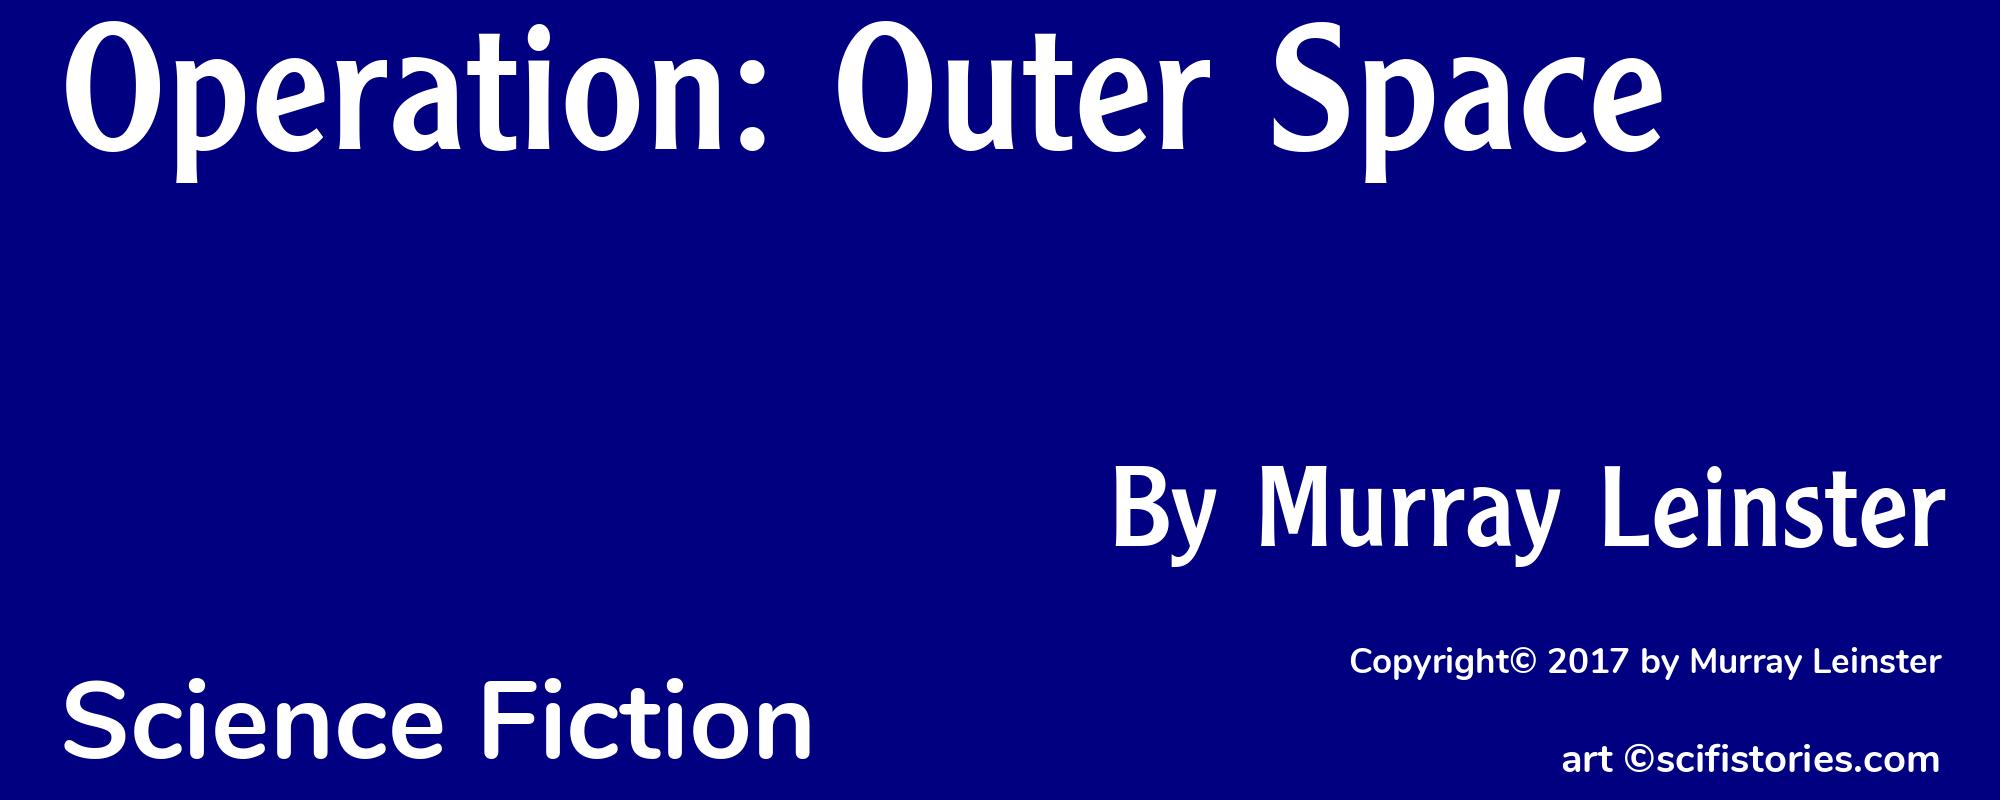 Operation: Outer Space - Cover